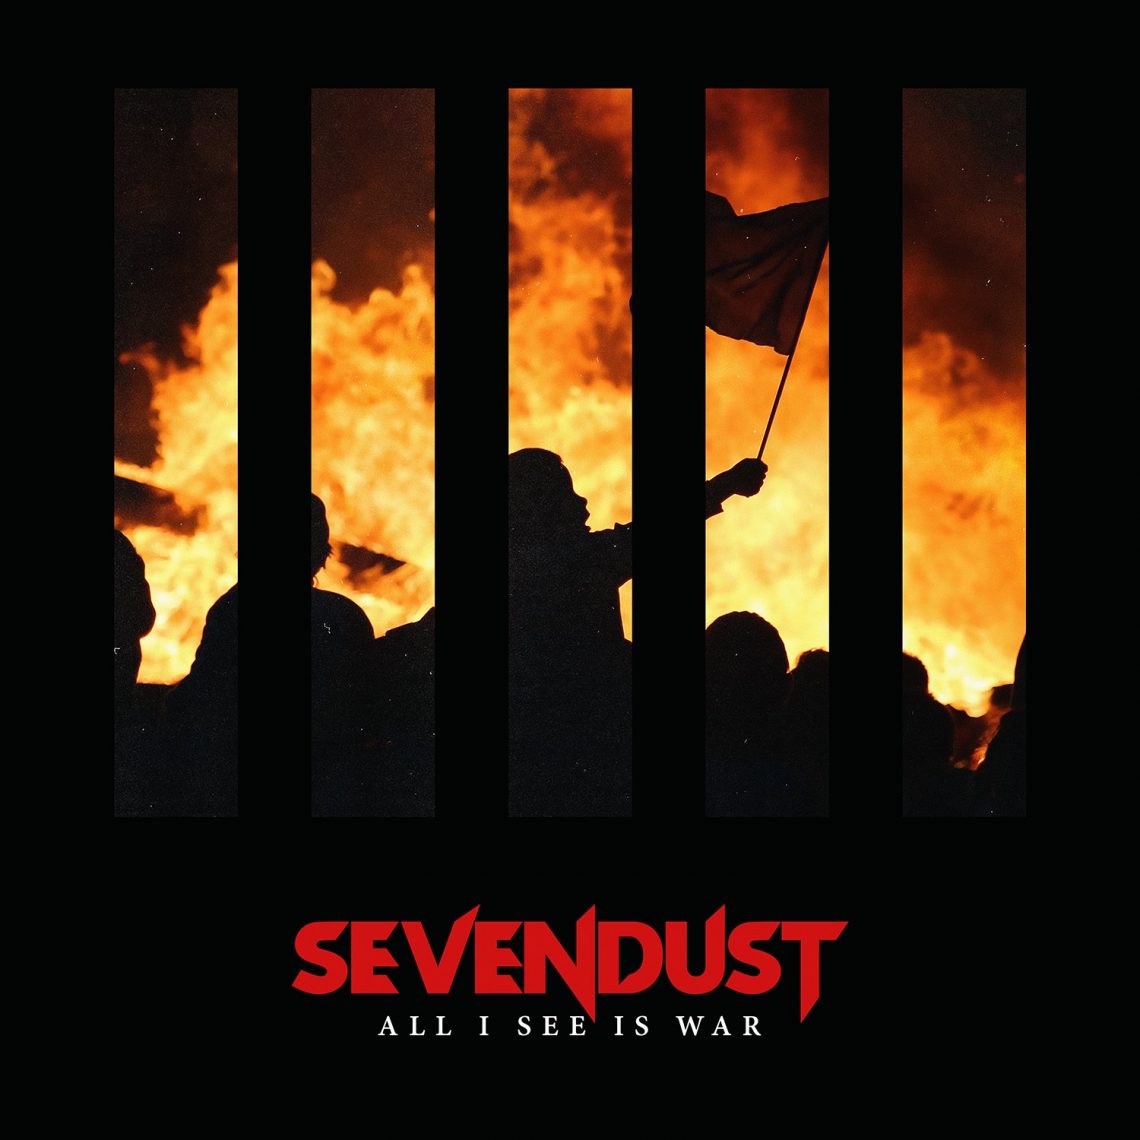 SEVENDUST return with new album on Rise Records this May